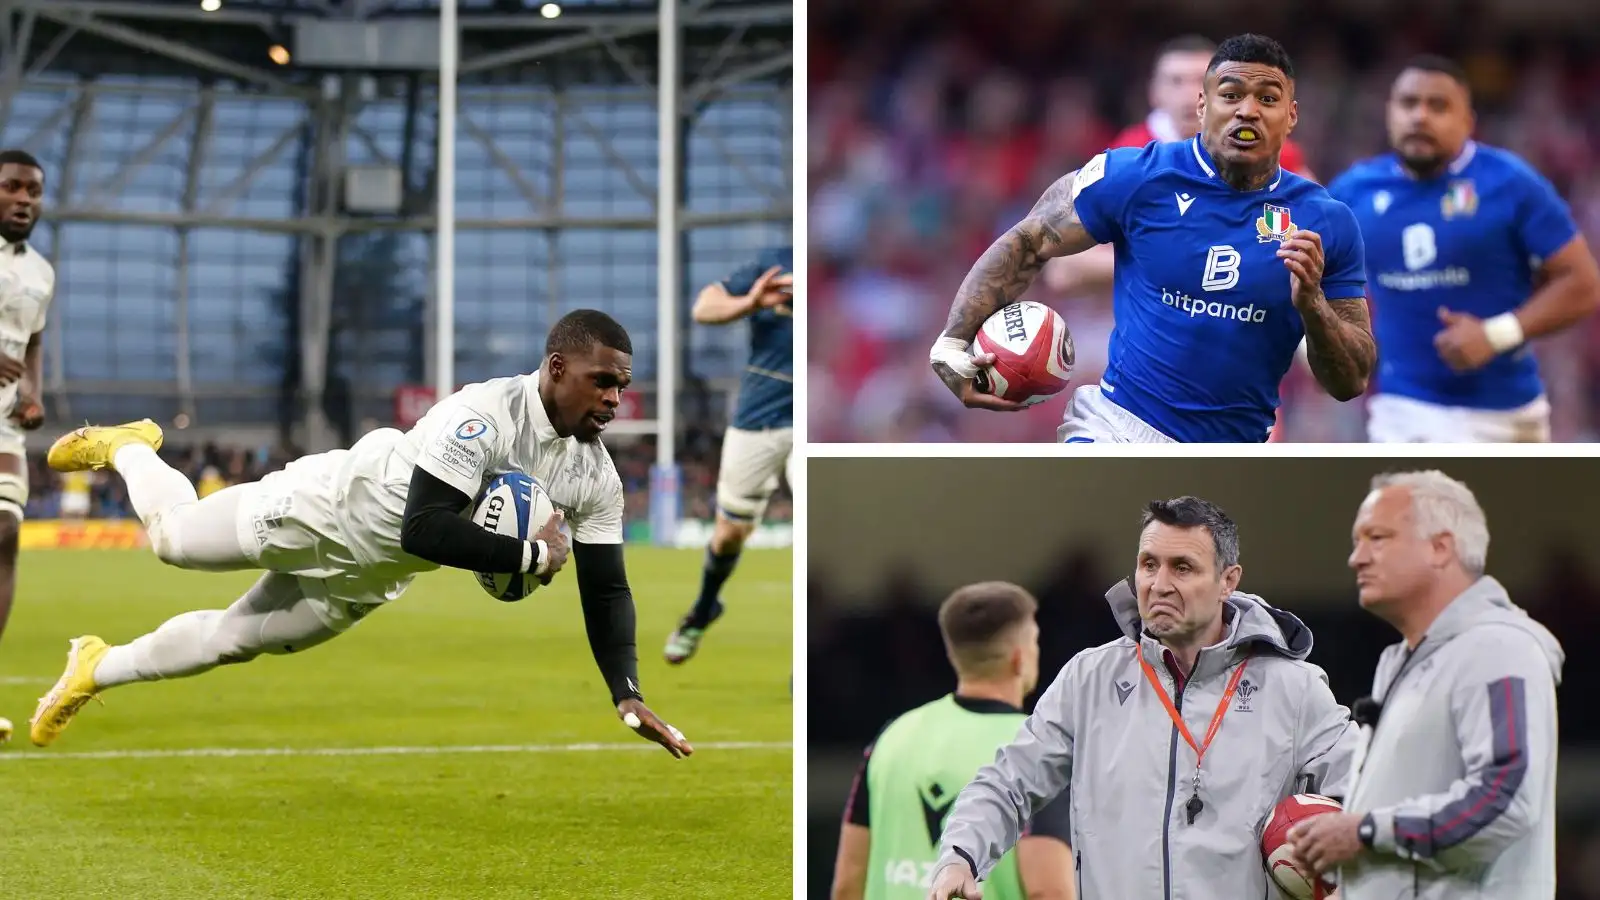 Planet Rugby recaps seven rugby rumours and transfers ahead of the weekend, including Christian Wade, Monty Ioane, Stephen Jones and much more.